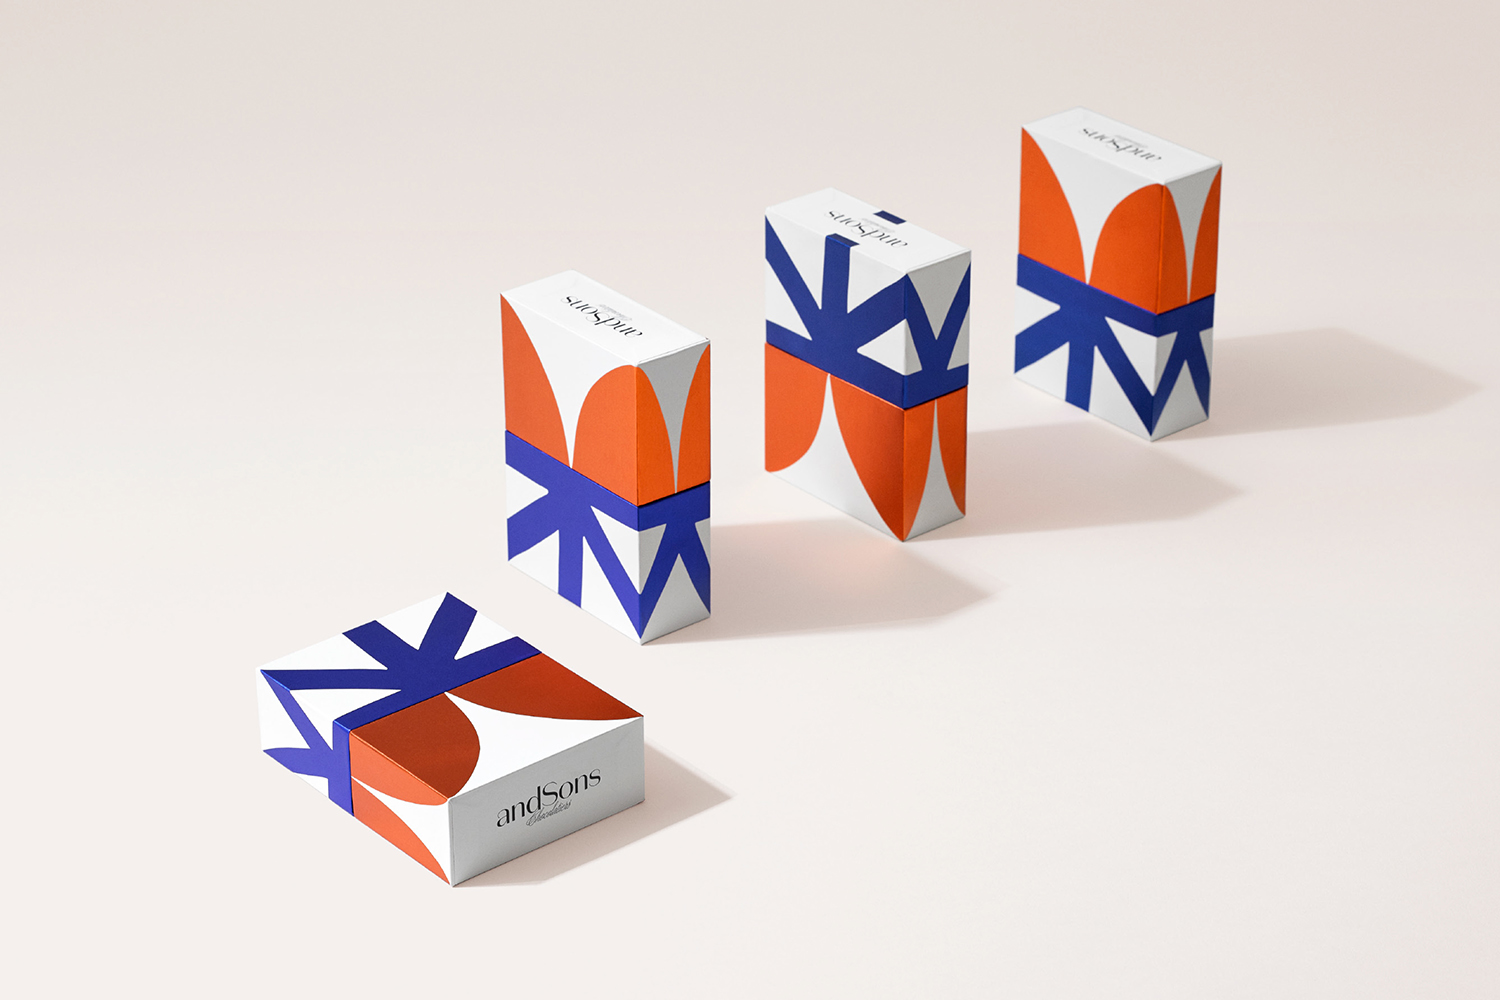 Logotype, branding and packaging by Base design for LA based chocolatier AndSons